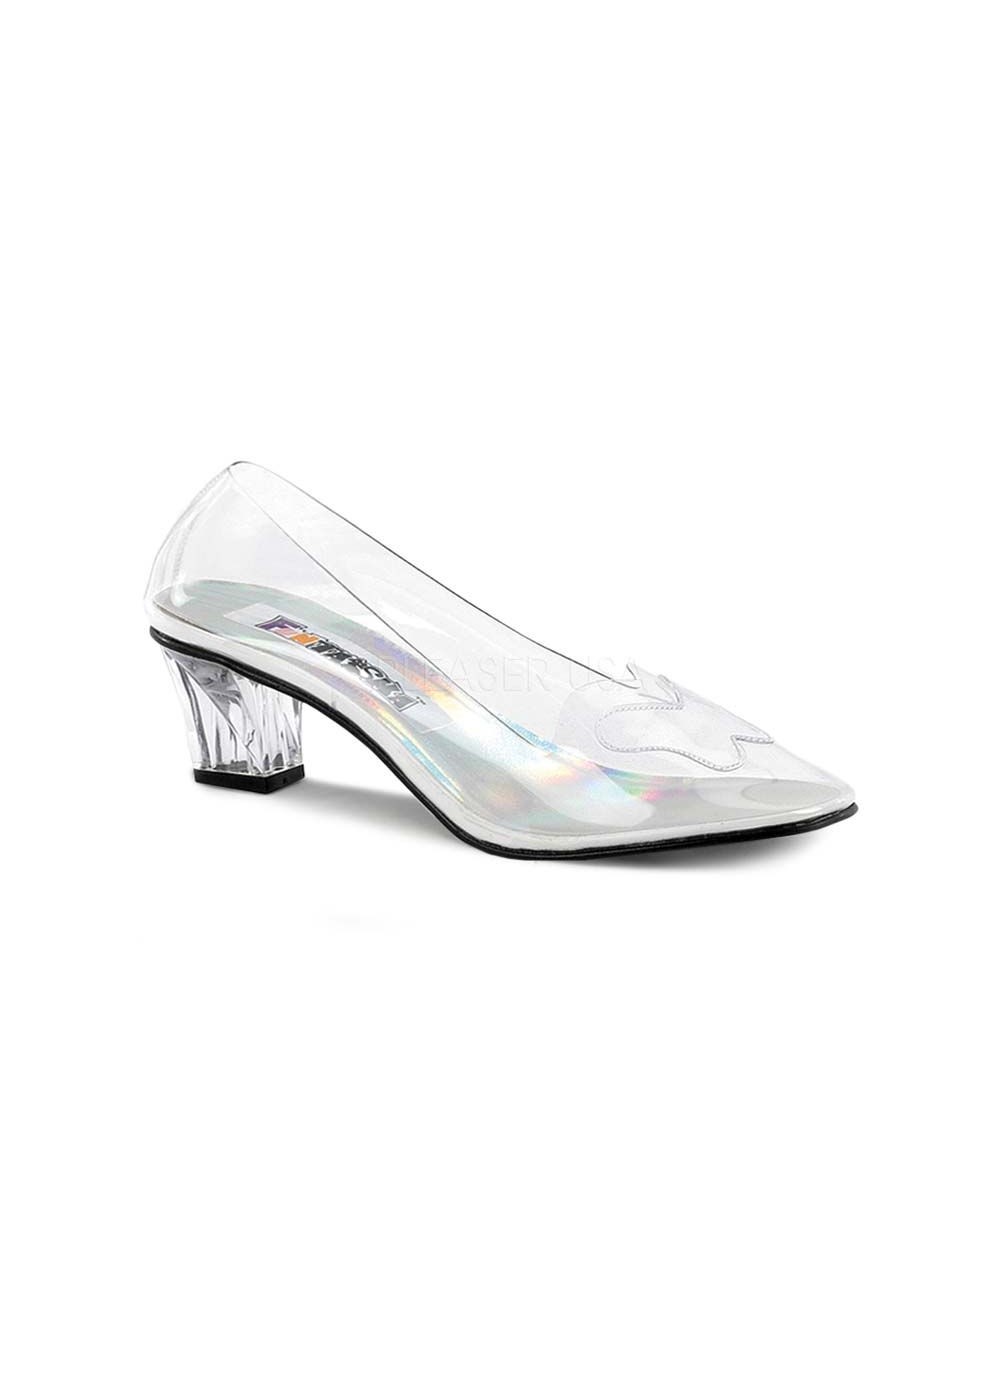 Clear Crystal Women Pump Shoes